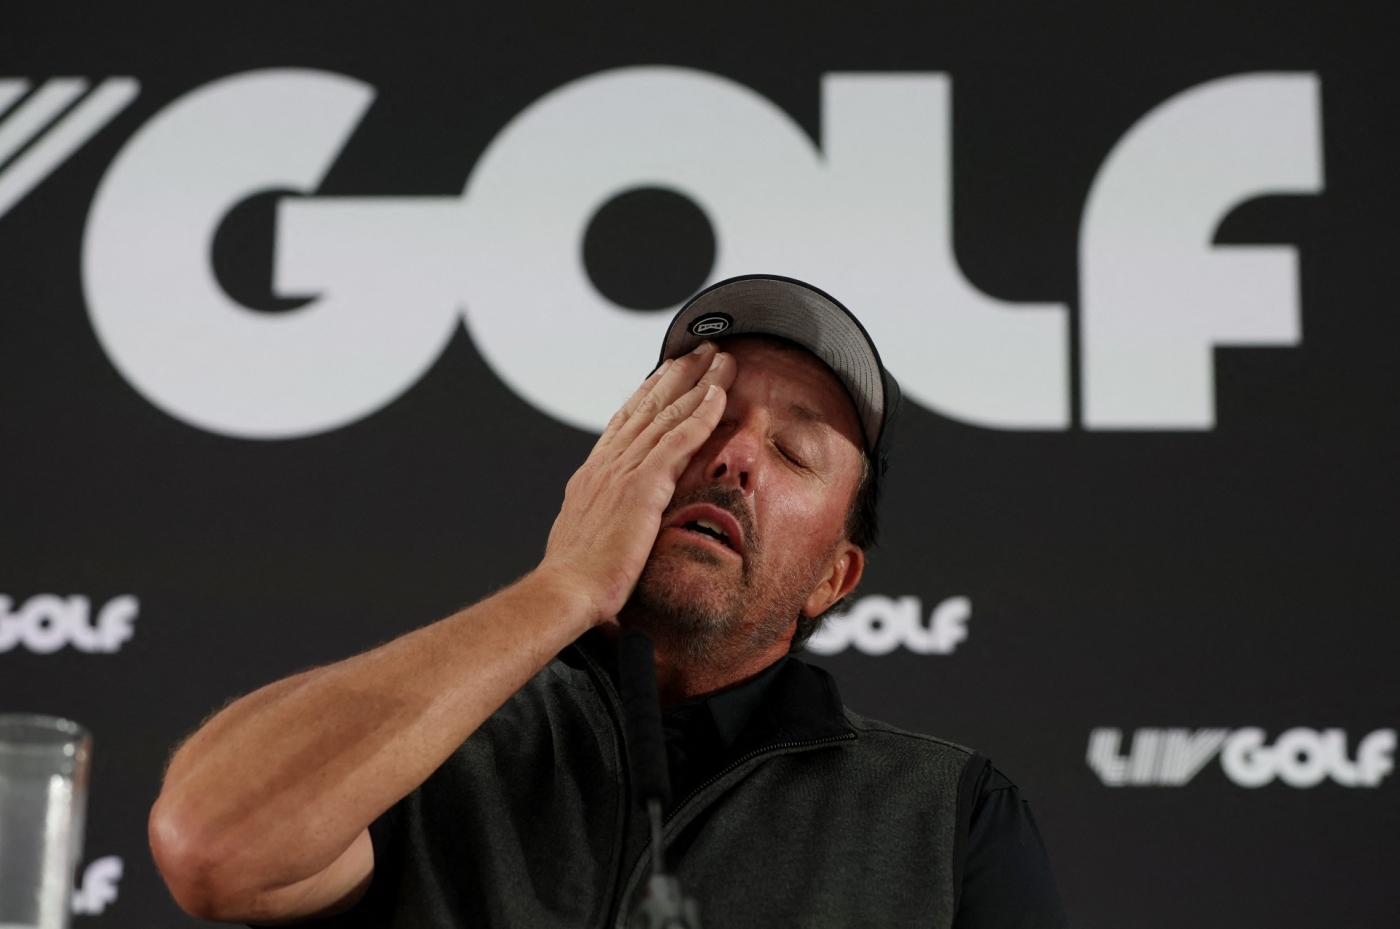 Phil Mickelson during a press conference at the Centurion Club, St Albans (Reuters)